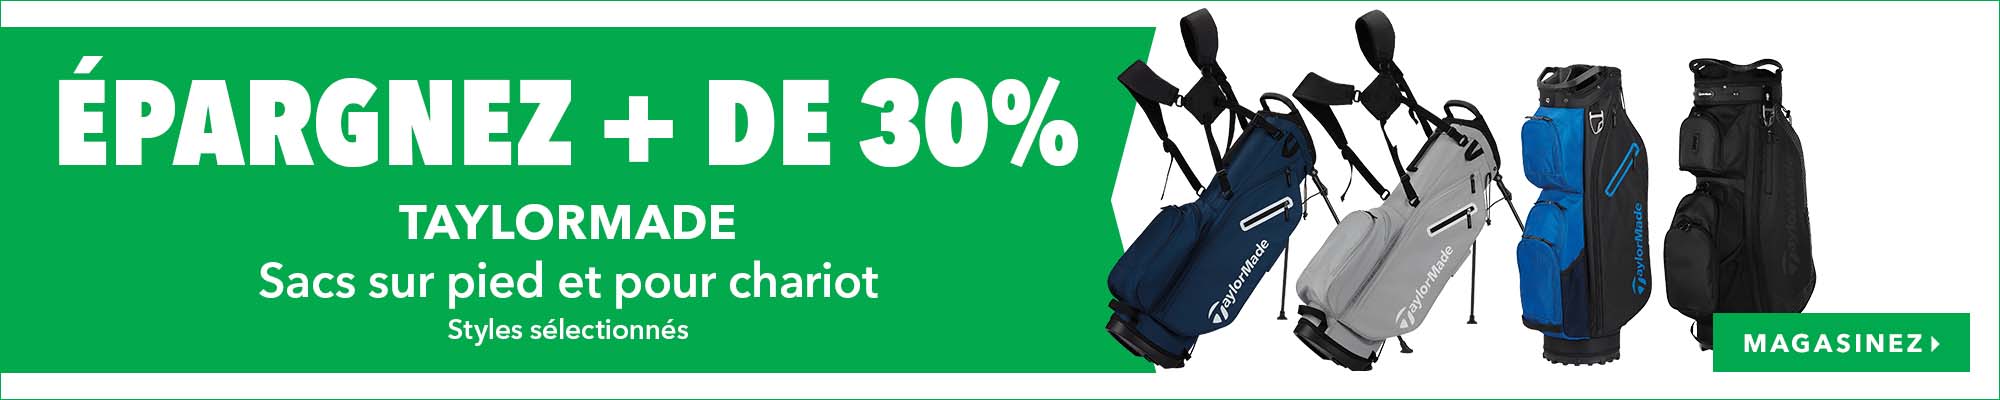 Save Big On TaylorMade Bags